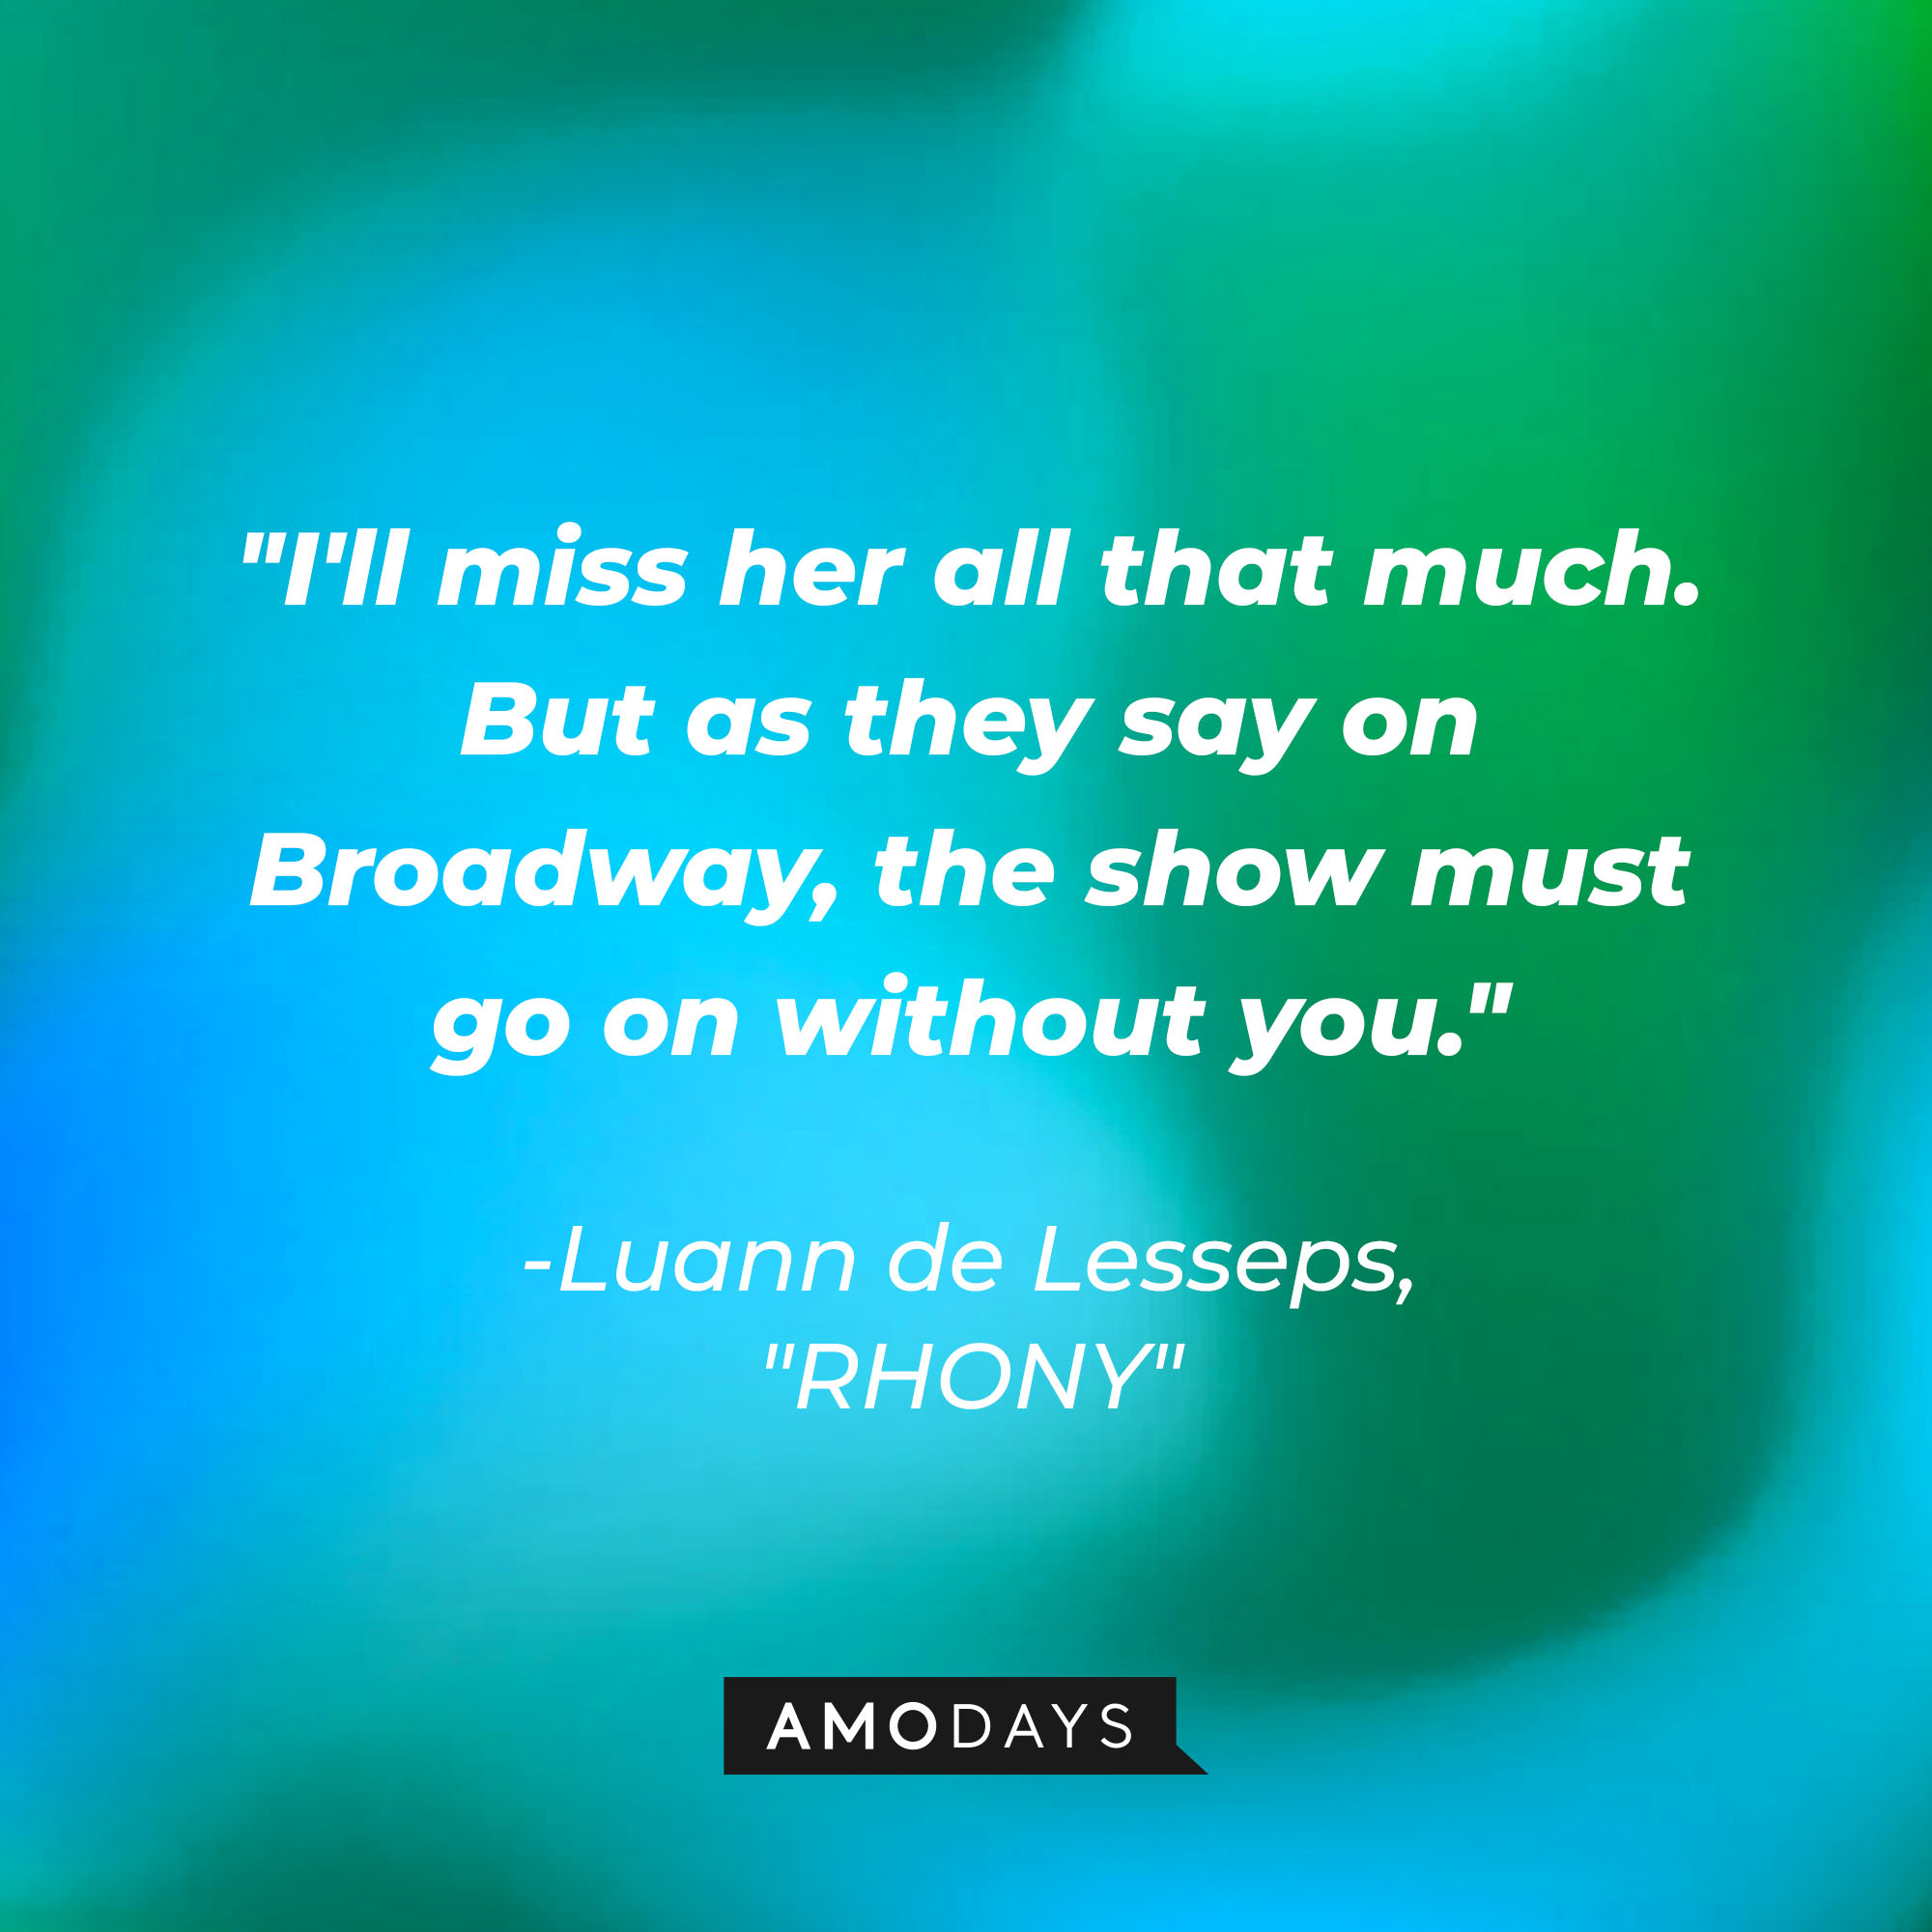 Luann de Lesseps' quote: "I'll miss her all that much. But as they say on Broadway, the show must go on without you" | Source: Amodays